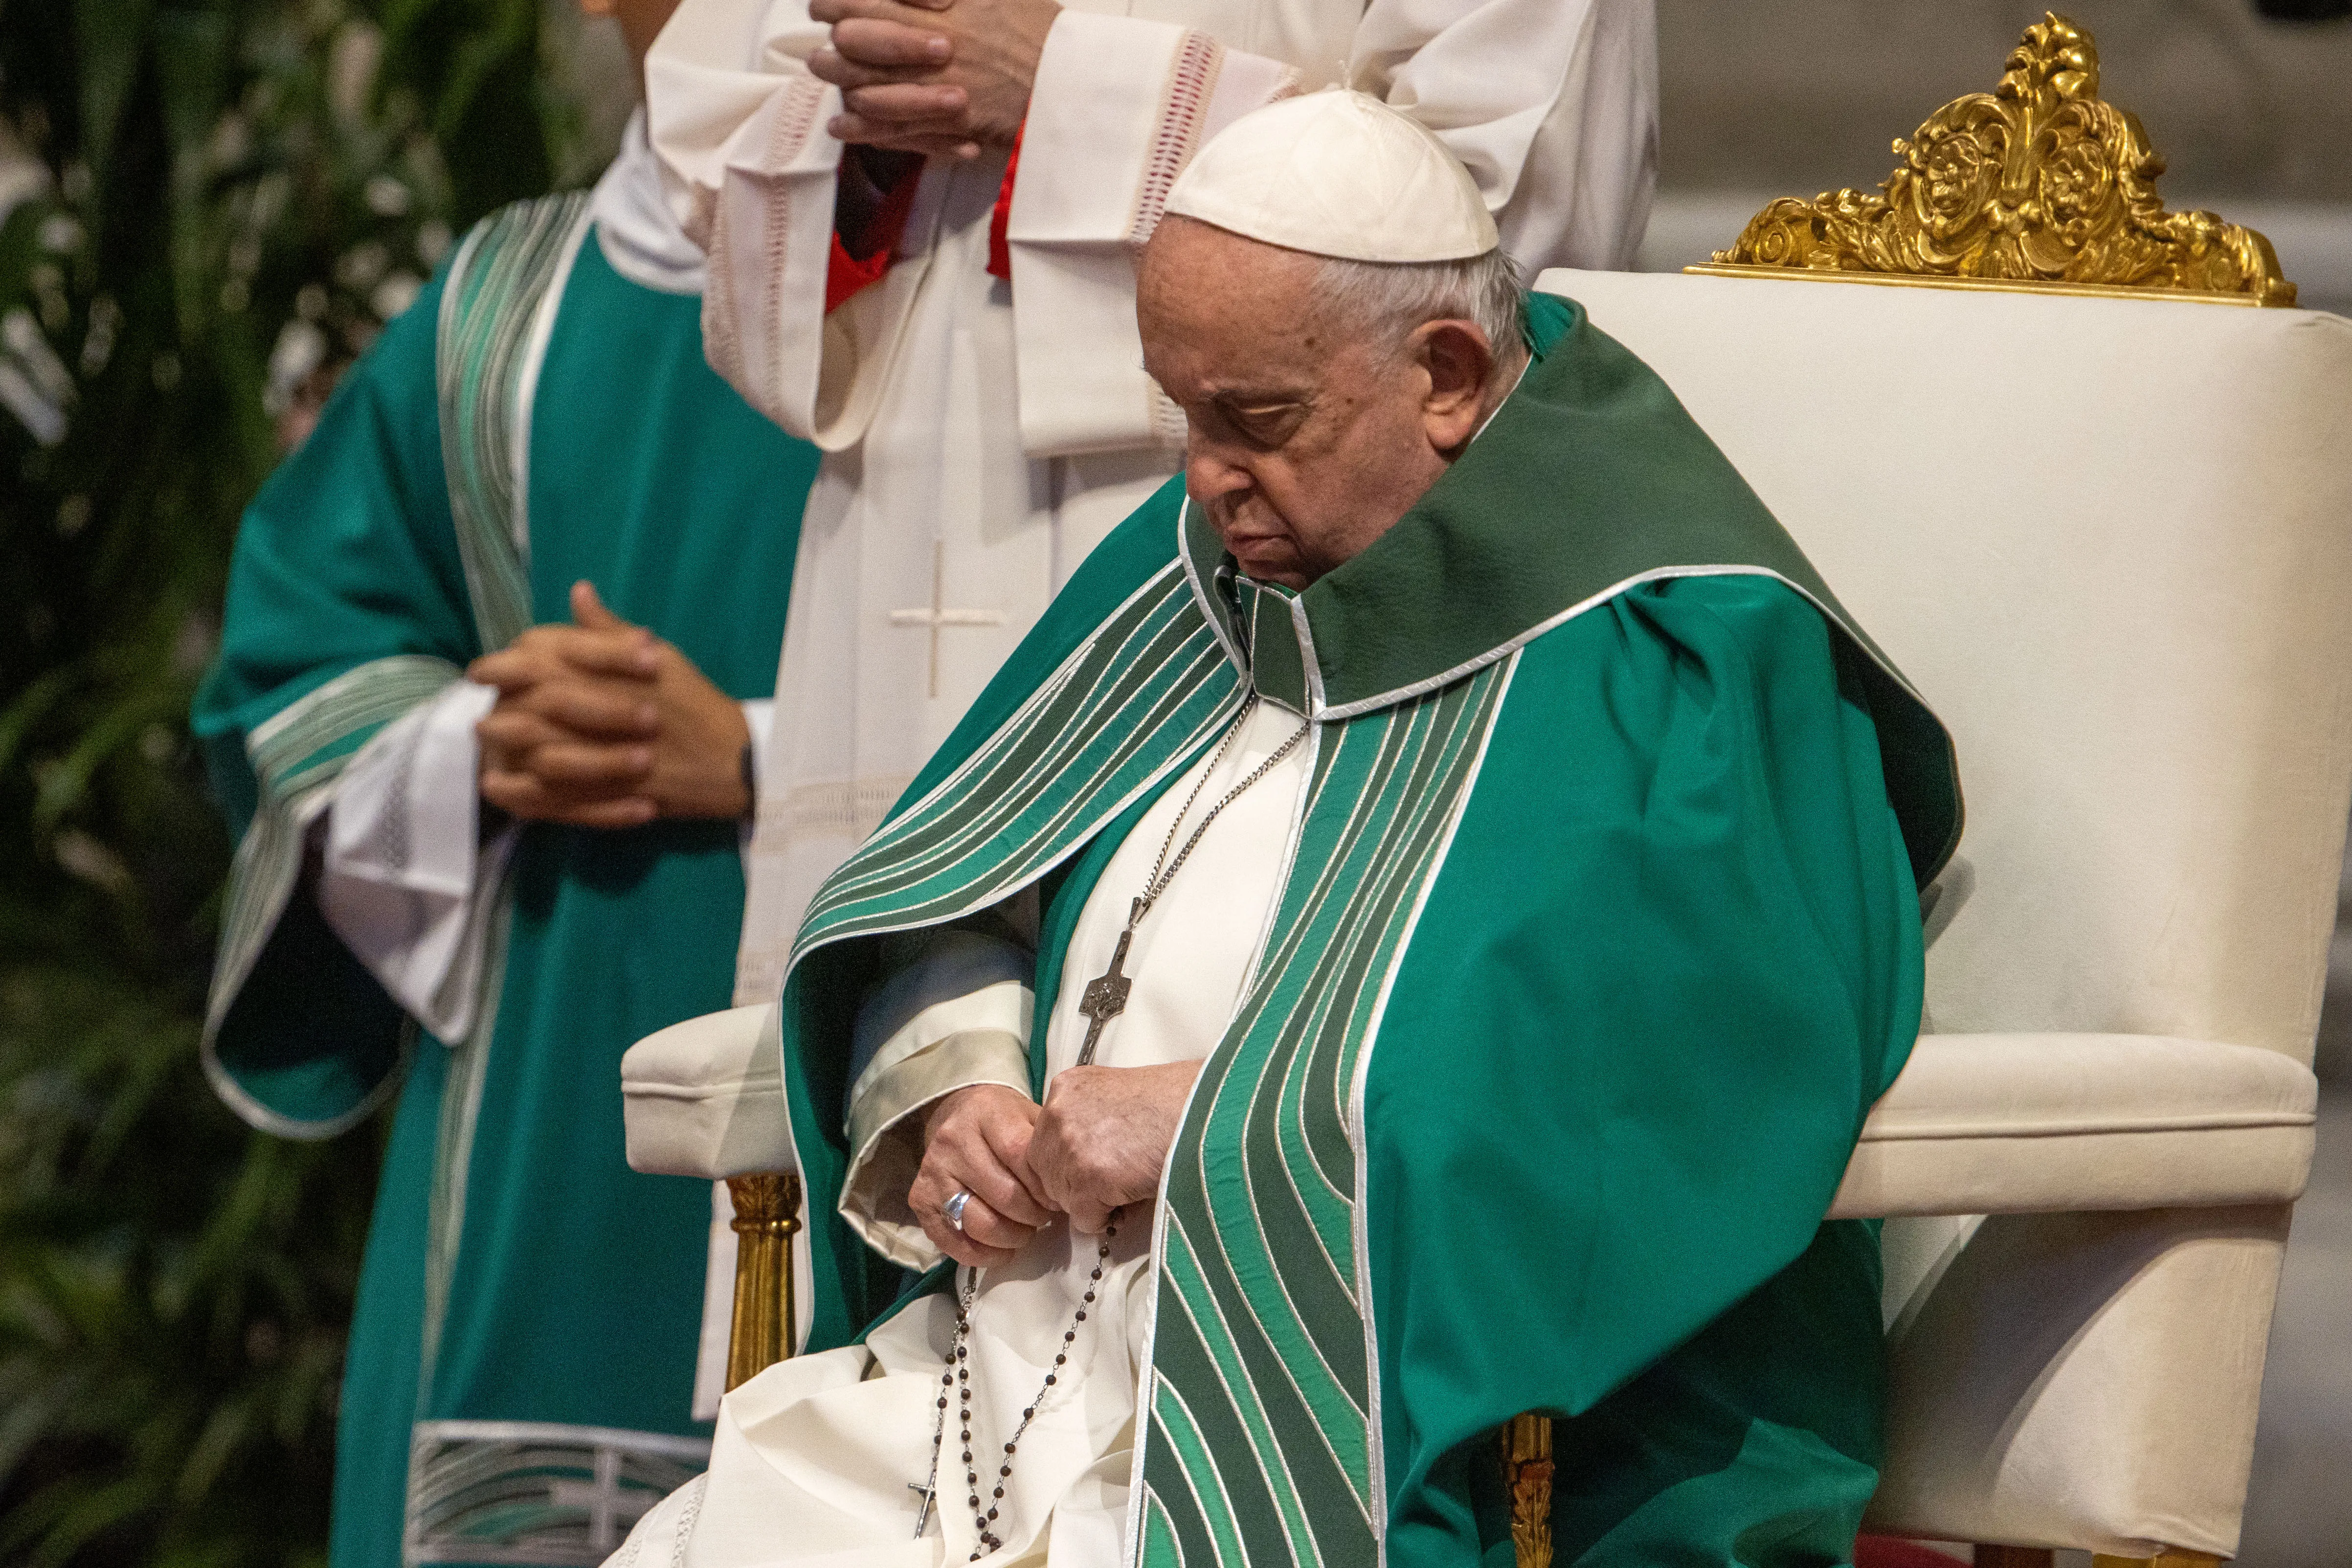 Pope Francis at the Synod on Synodality’s closing Mass in St. Peter’s Basilica on Oct. 29, 2023.?w=200&h=150